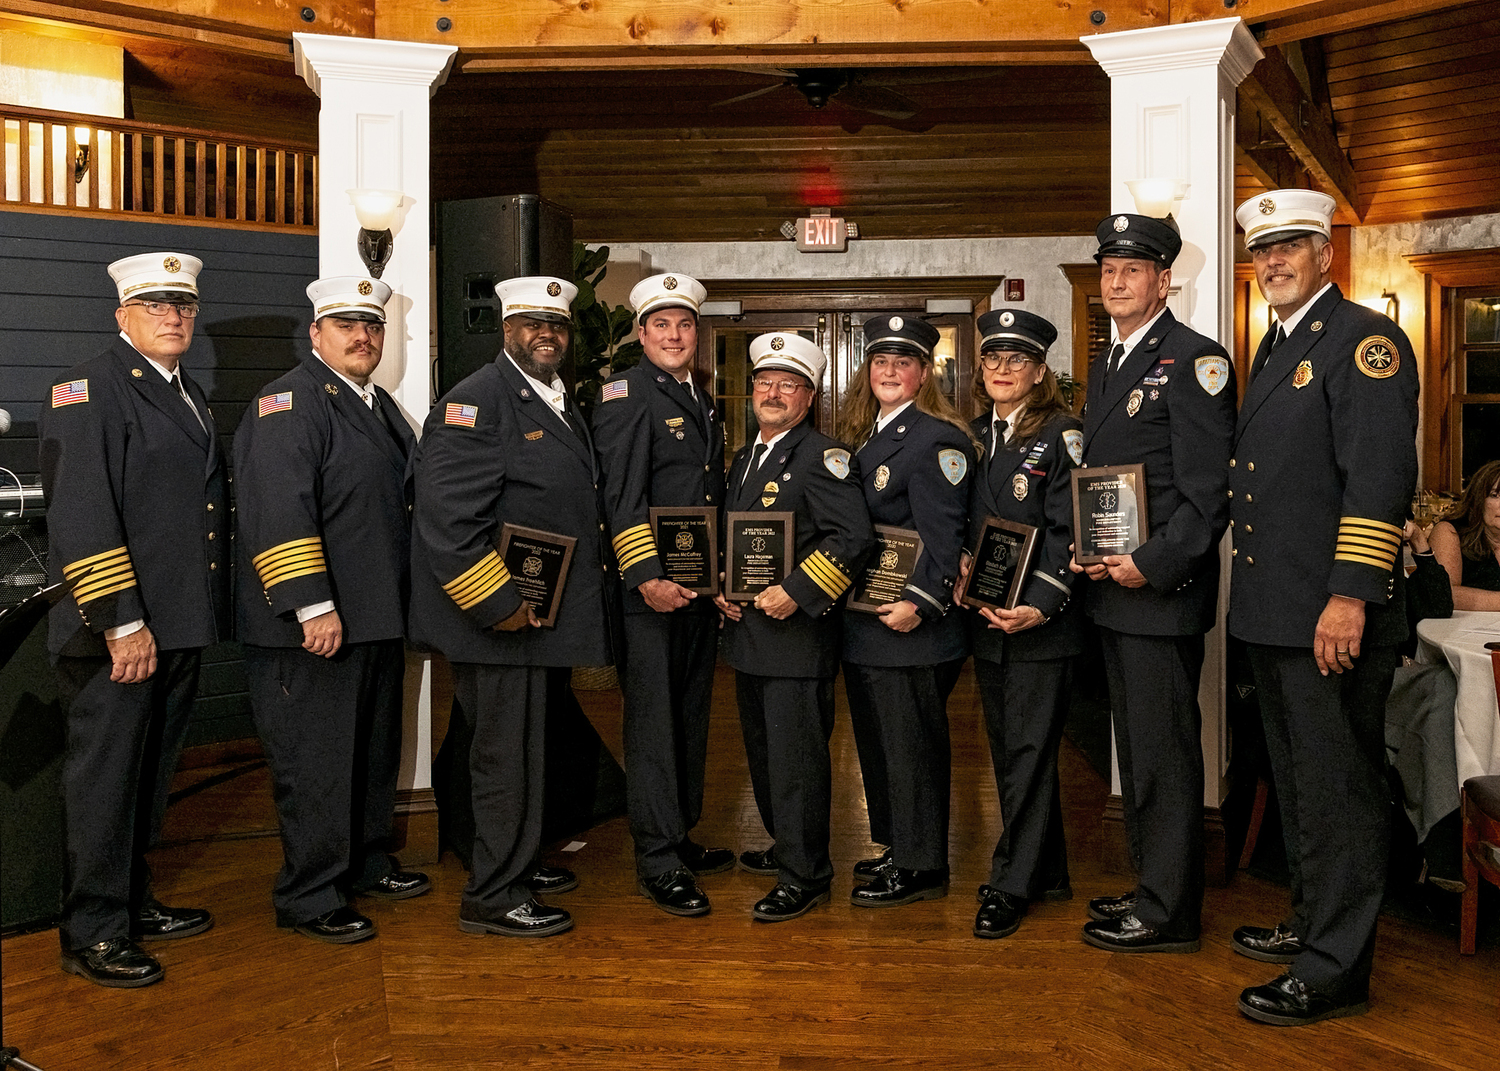 Left to right Southampton Town Chiefs Council Secretary/Treasurer Chris Hansen, Chiefs Council VP Michael Tortorice, Bridgehampton Fire Department Chief Nicholas Hemby,  BFD Ex-Chief Mark Balserus, BFD First Assistant Chief Thomas Federico, 2020 Firefighter of the Year Lt. Meghan Dombowski, 2021 EMS Provider of the Year Elizabeth Kotz, 2020 EMS Provider of the Year Robin Saunders, and Chiefs Council President Roy 